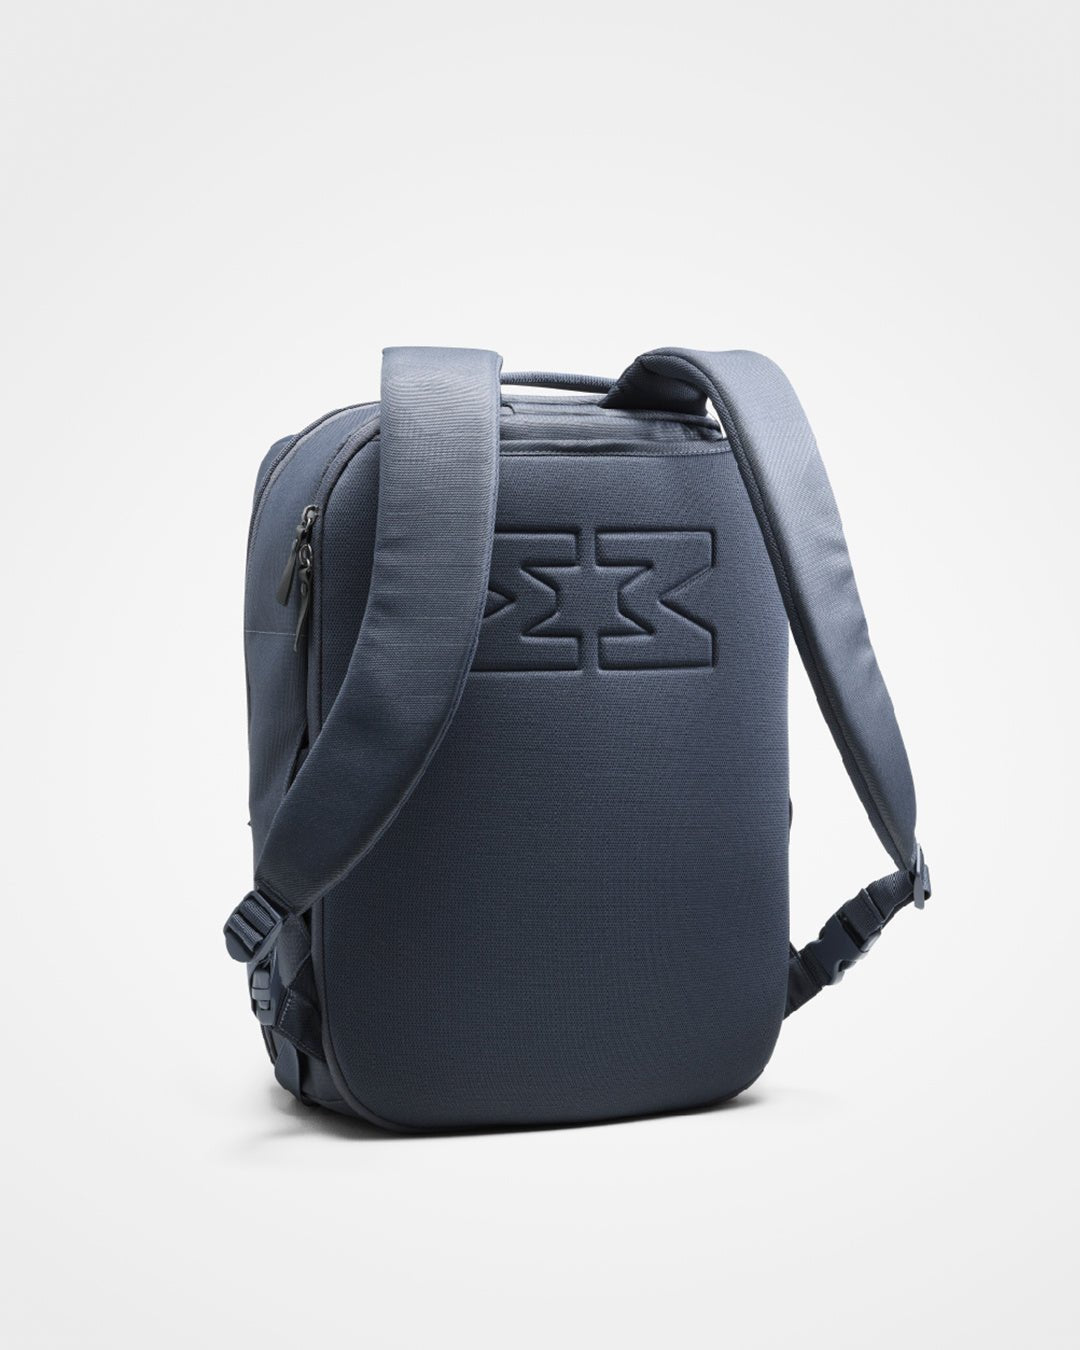 Minimies The Parent backpack - Dusk Blue - Neo Essentials Store